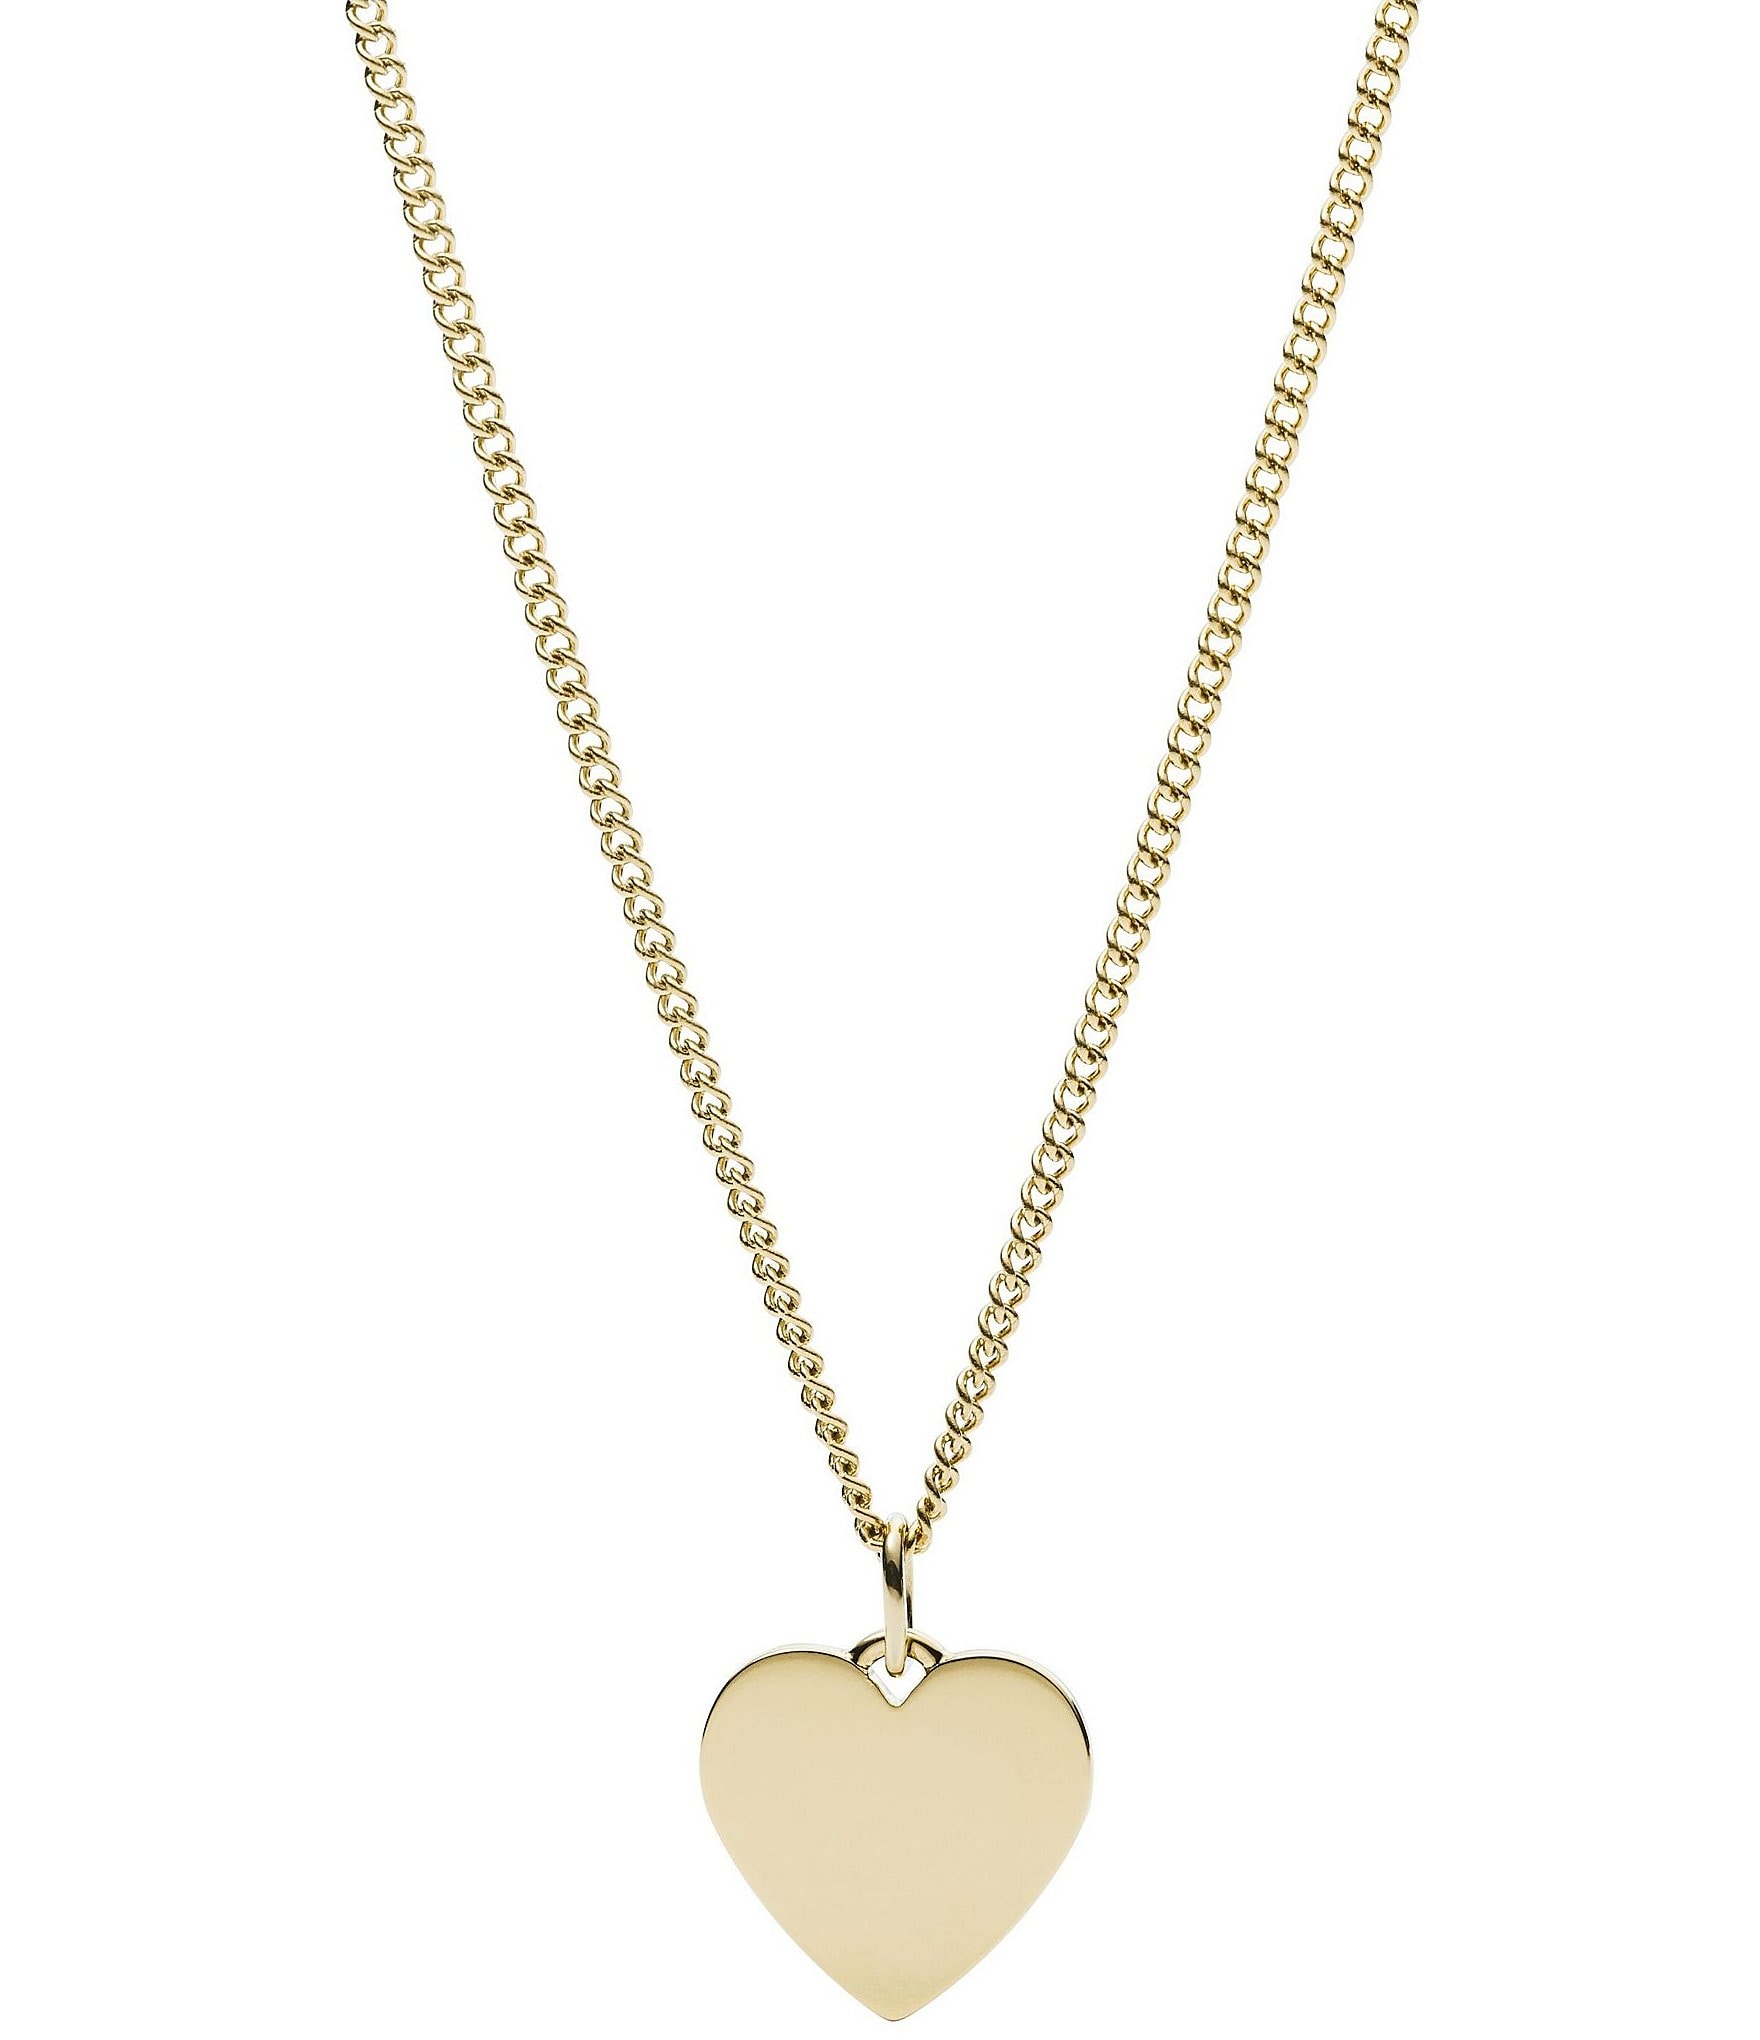 Fossil Lane Heart Gold-Tone Stainless Steel Necklace | Dillard's